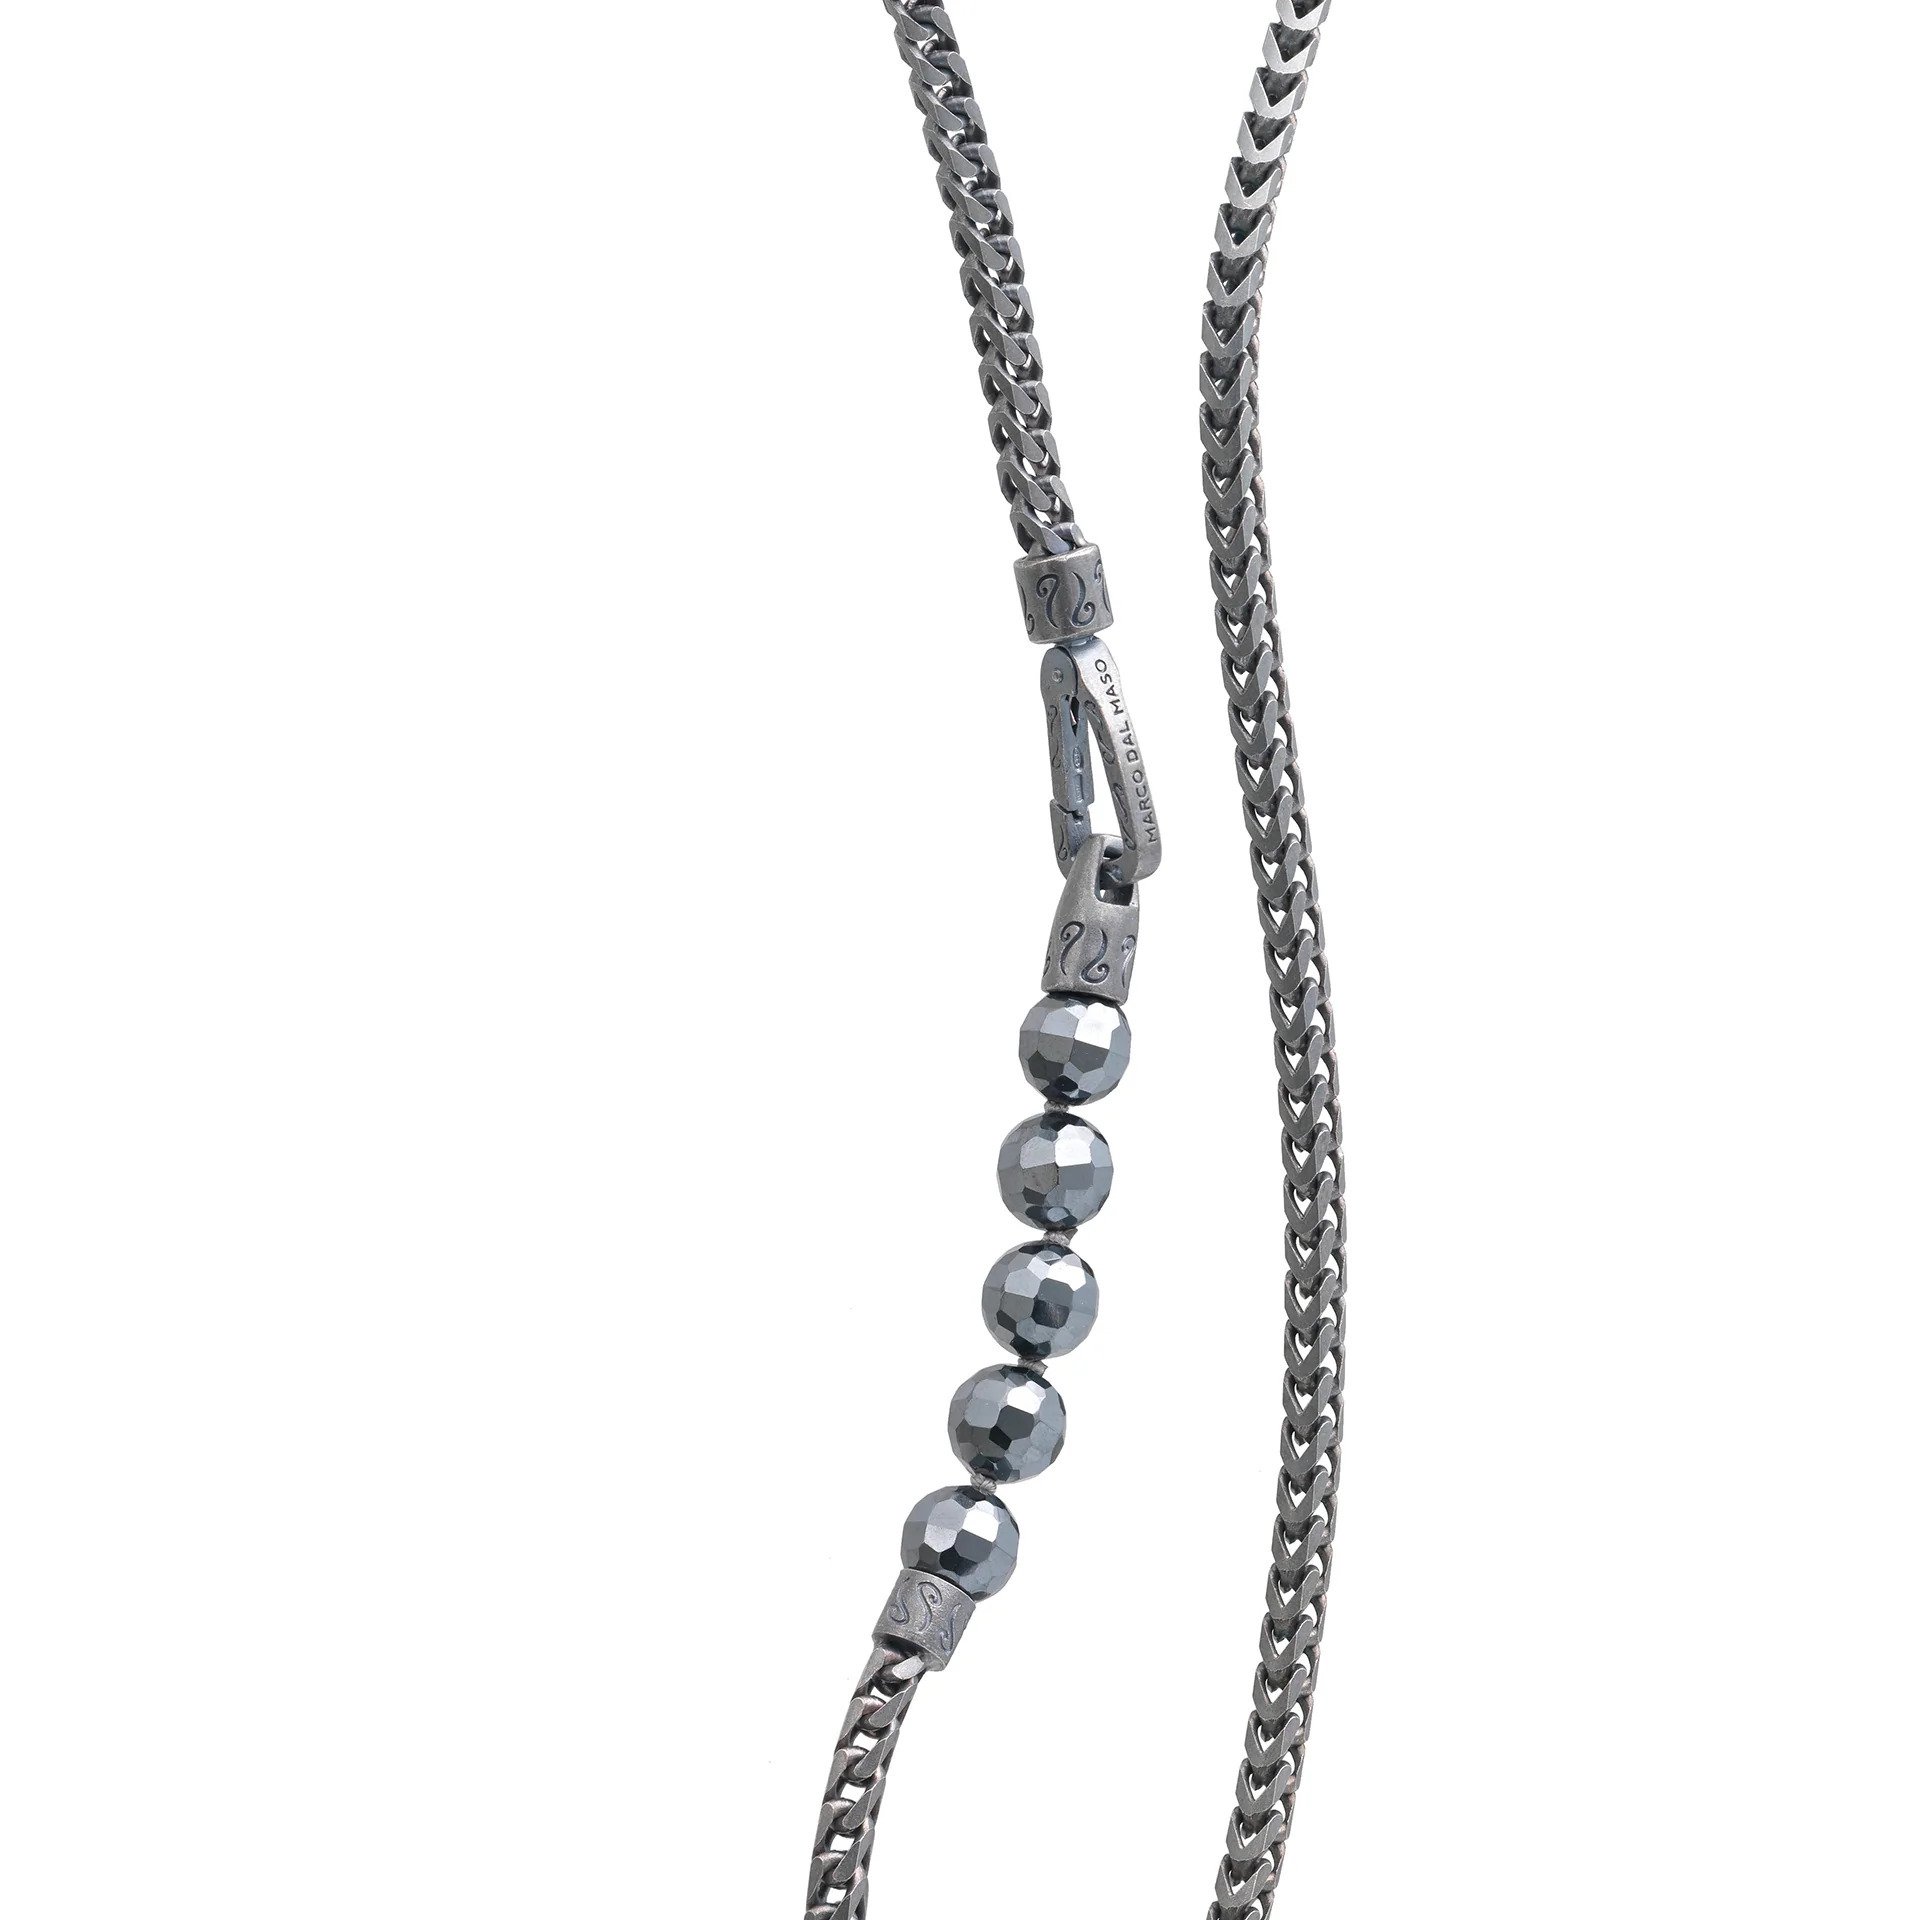 24" Faceted Hematite Bead & Ulysses Chain Link Necklace